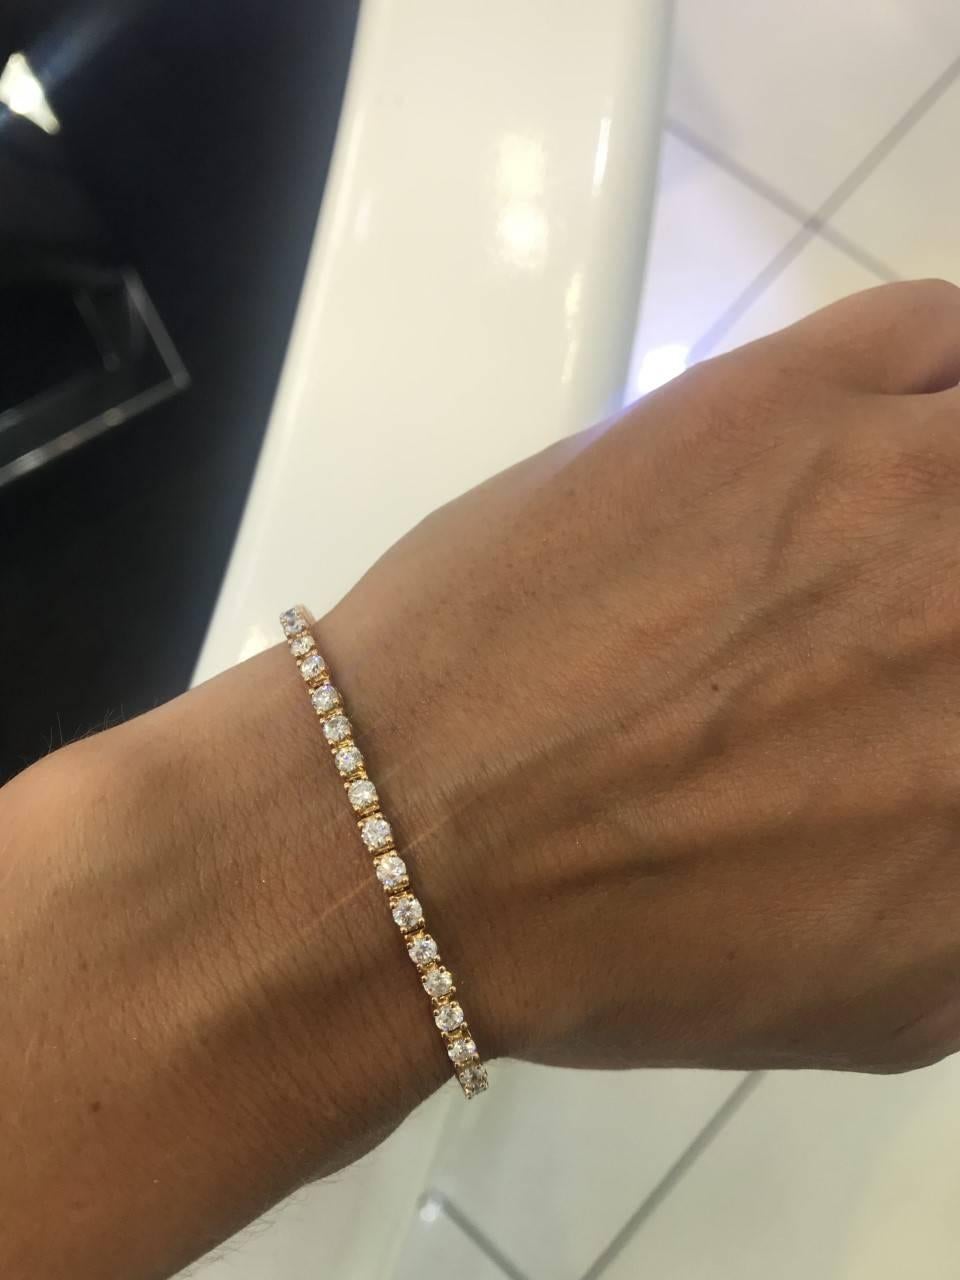 A classic piece that stands the test of time, enjoy the ultimate in luxury and beauty with this gorgeous diamond tennis bracelet, featuring 5.00 Carat of dazzling White Color G/H Clarity SI1 Round Brilliant Cut diamonds beautifully held in a classic